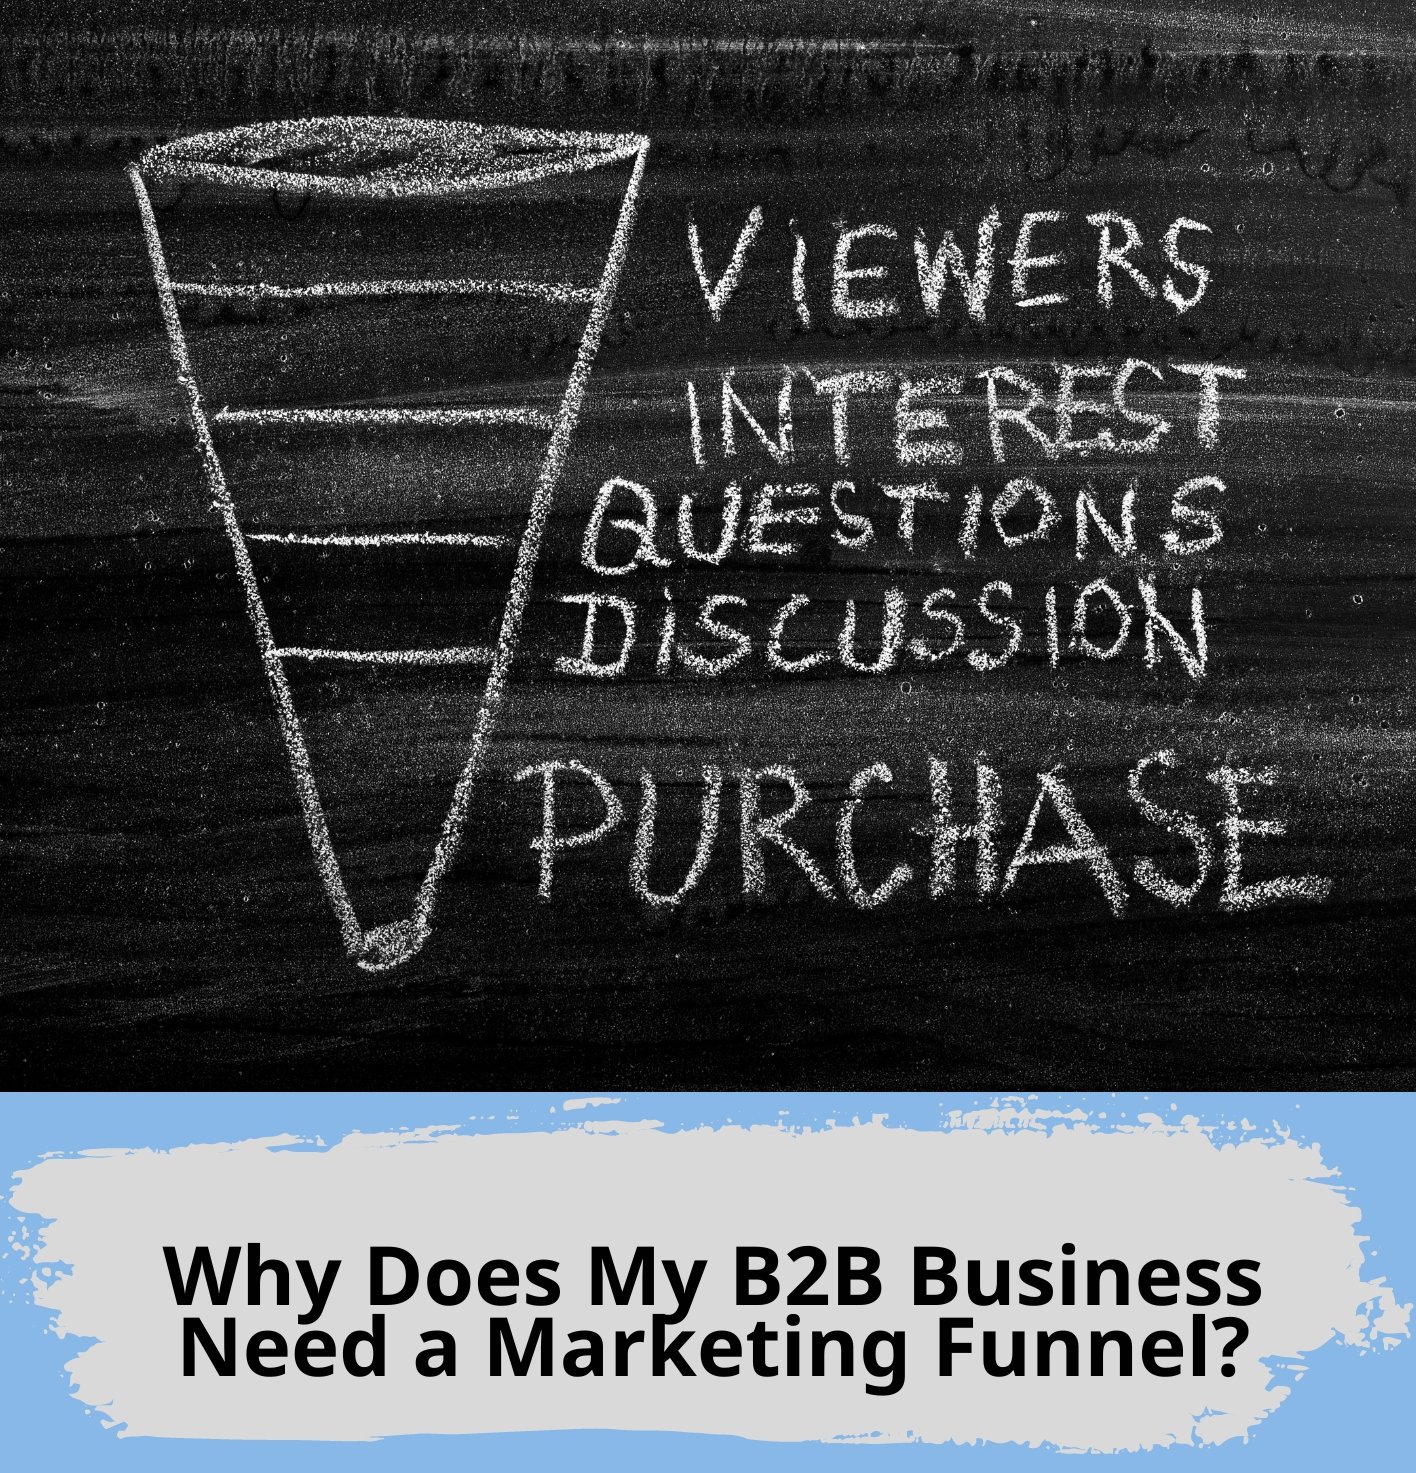 Why Does My B2B Business Need a Marketing Funnel?